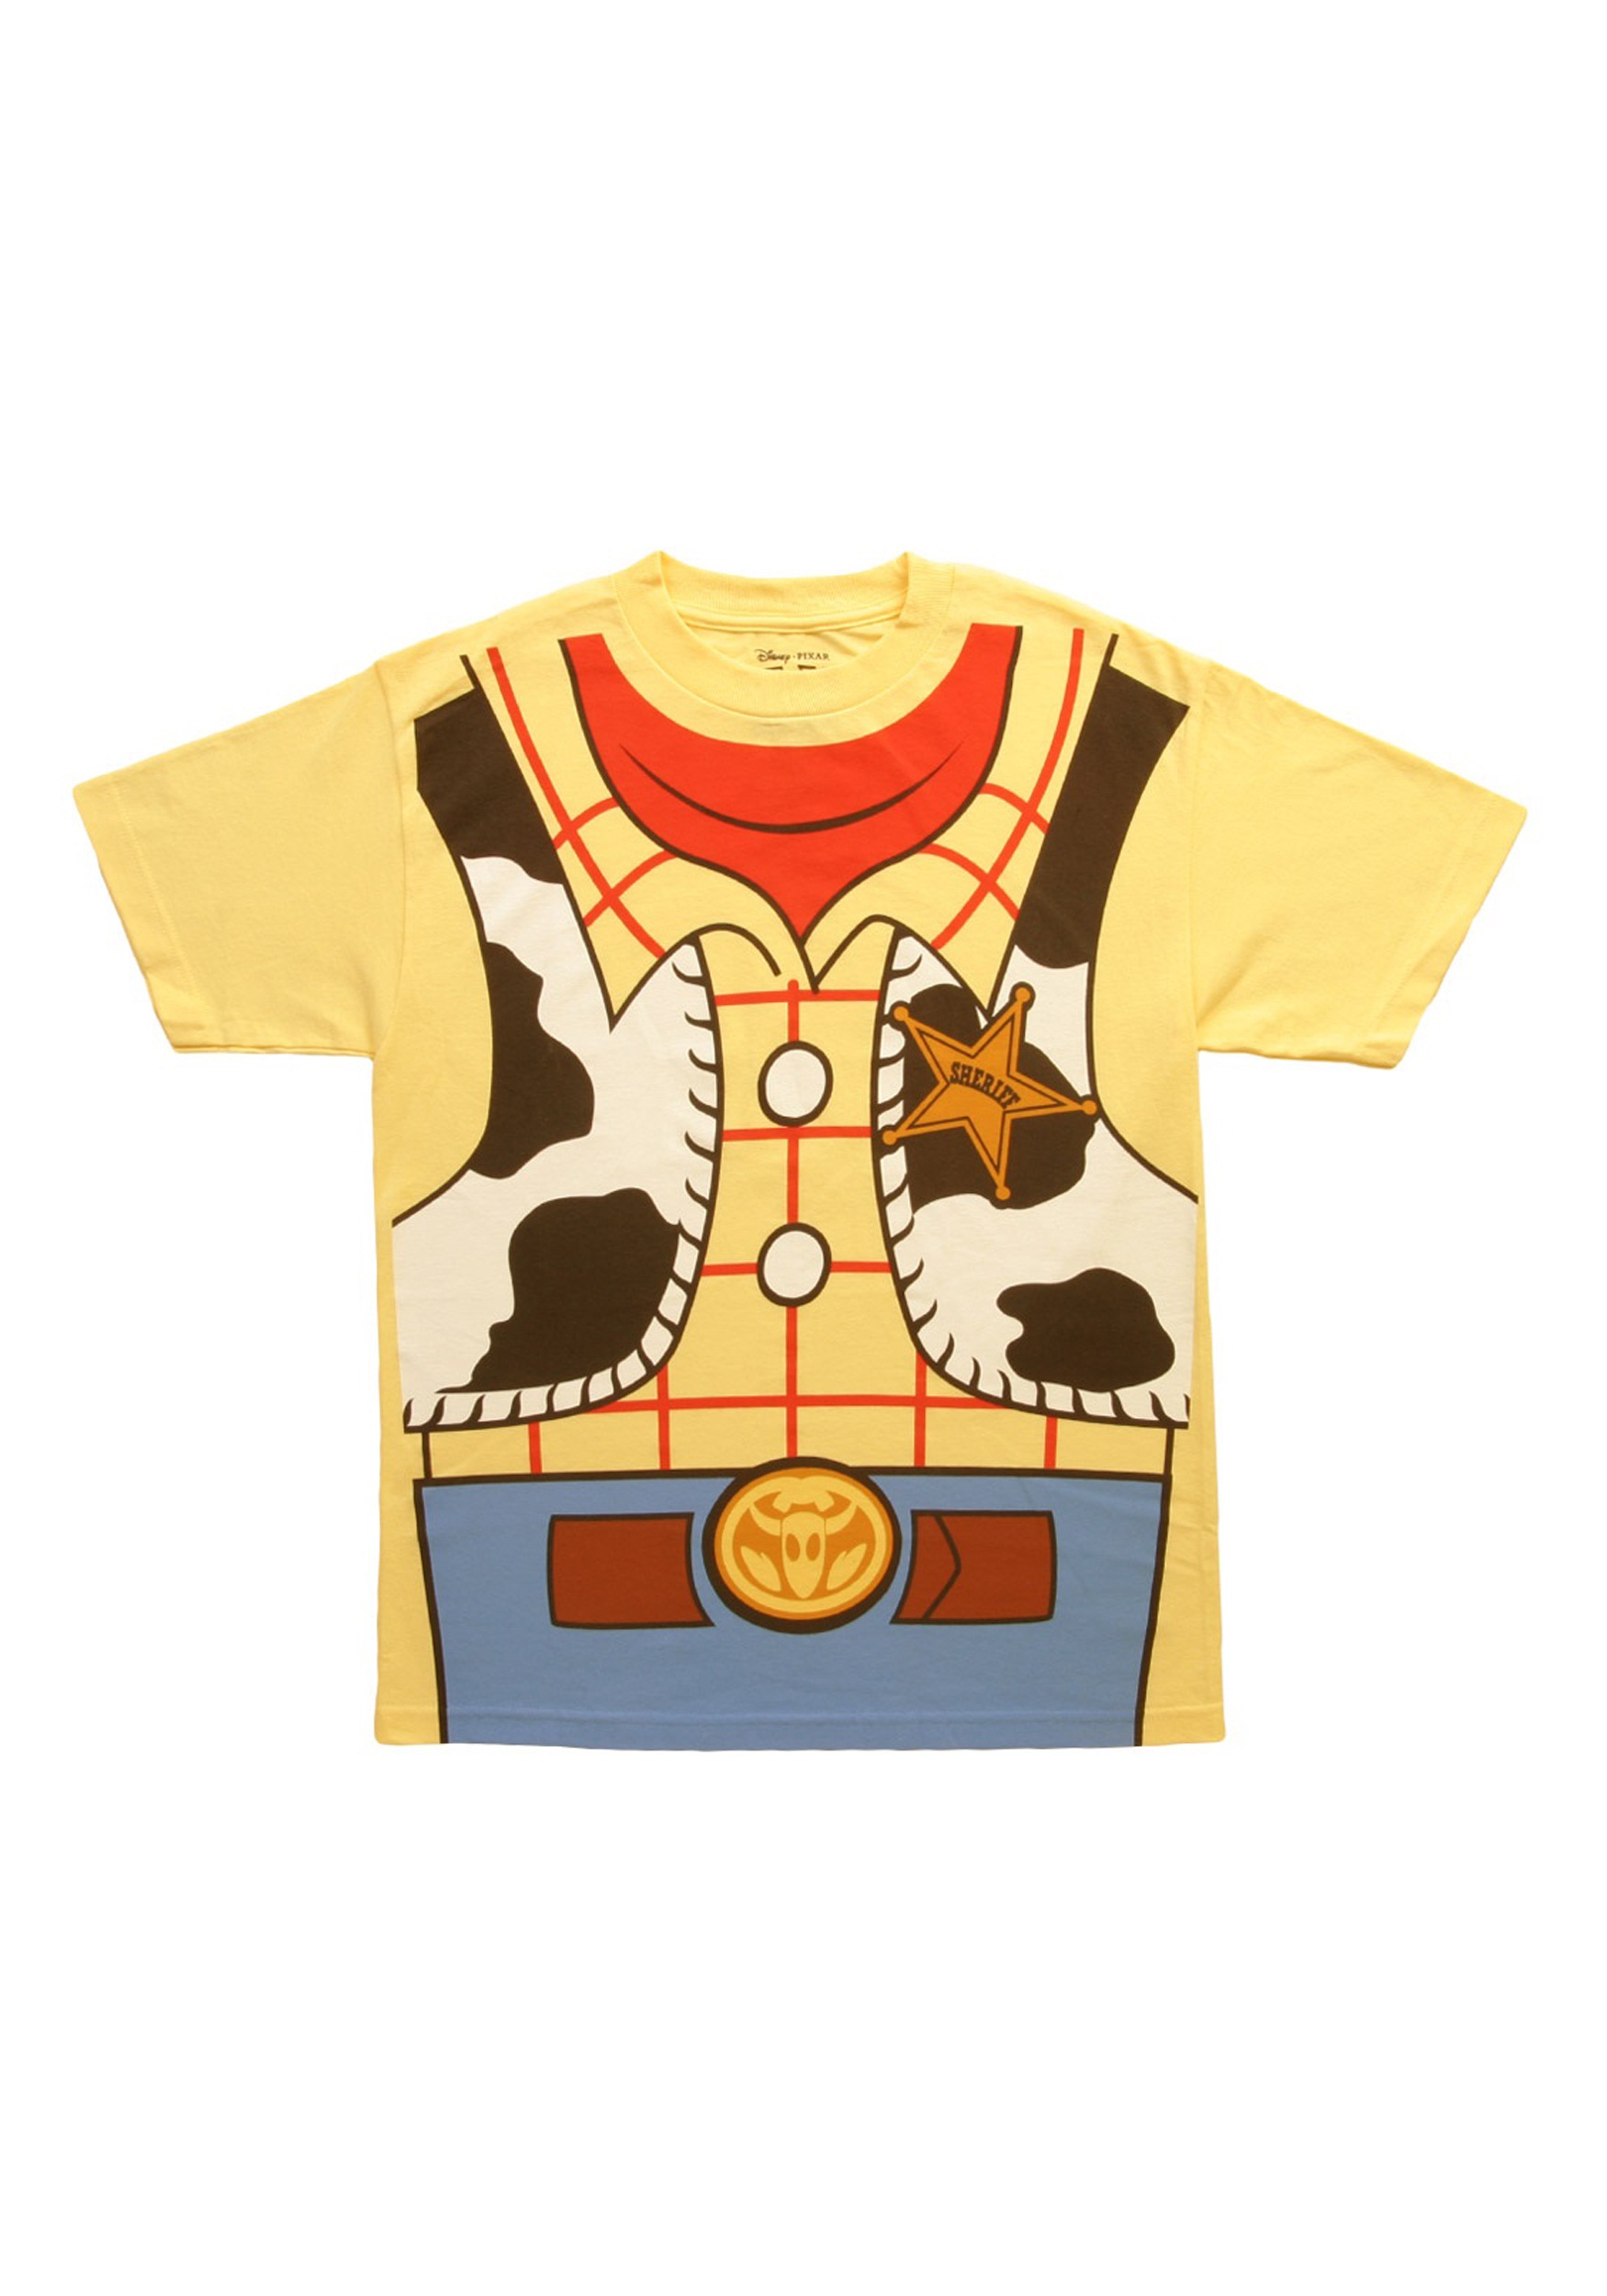 I Am Woody Toy Story Costume T-Shirt